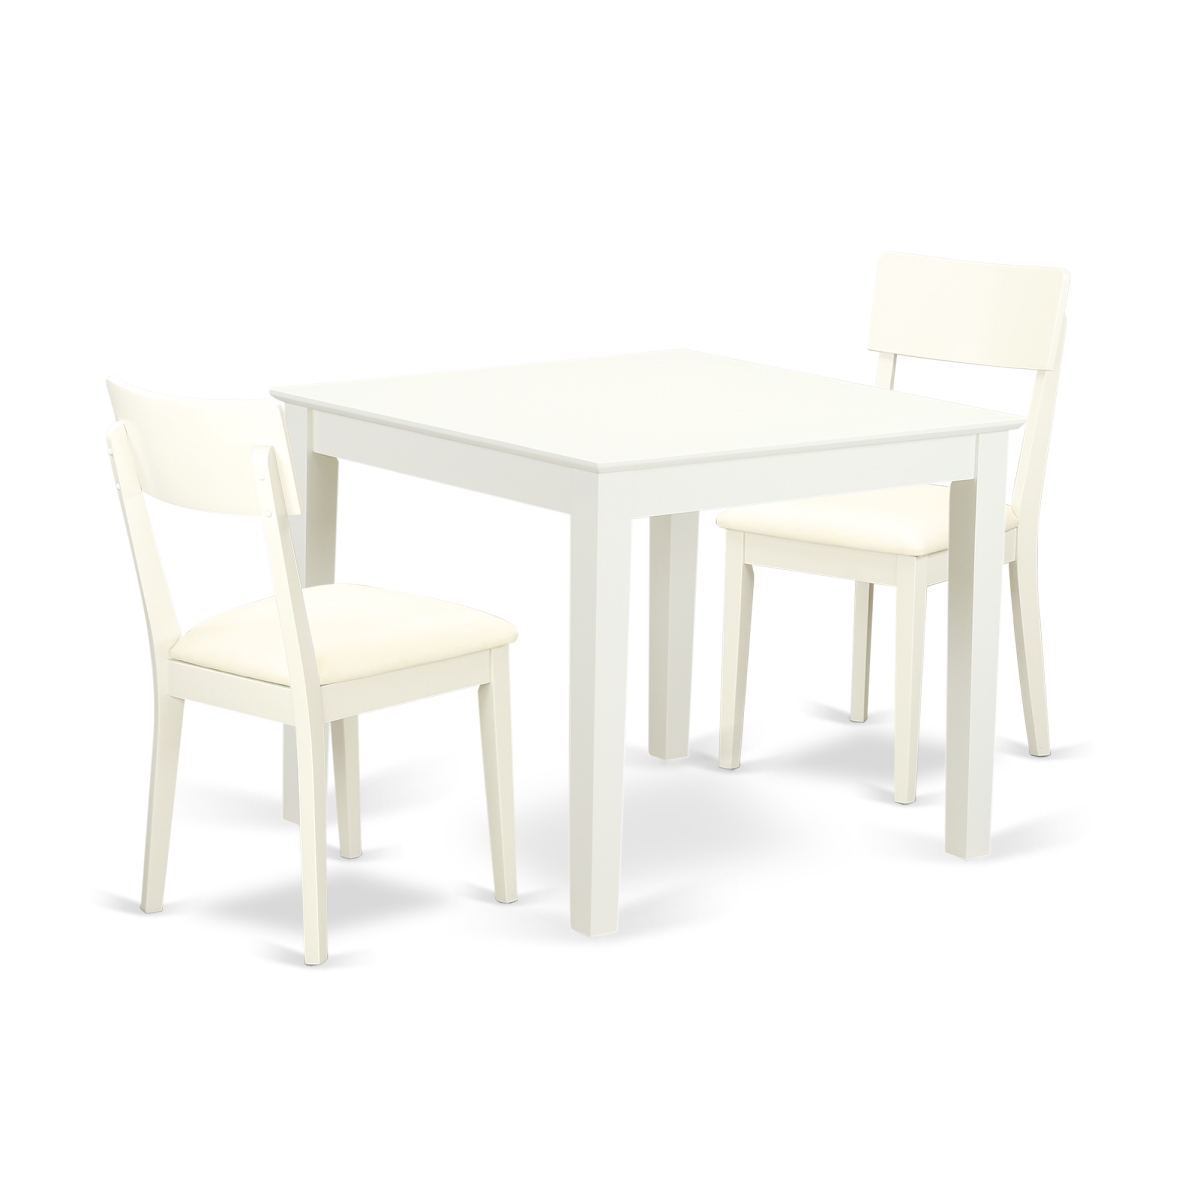 Oxad3-lwh-lc 3 Piece Dinette Table Set, Linen White